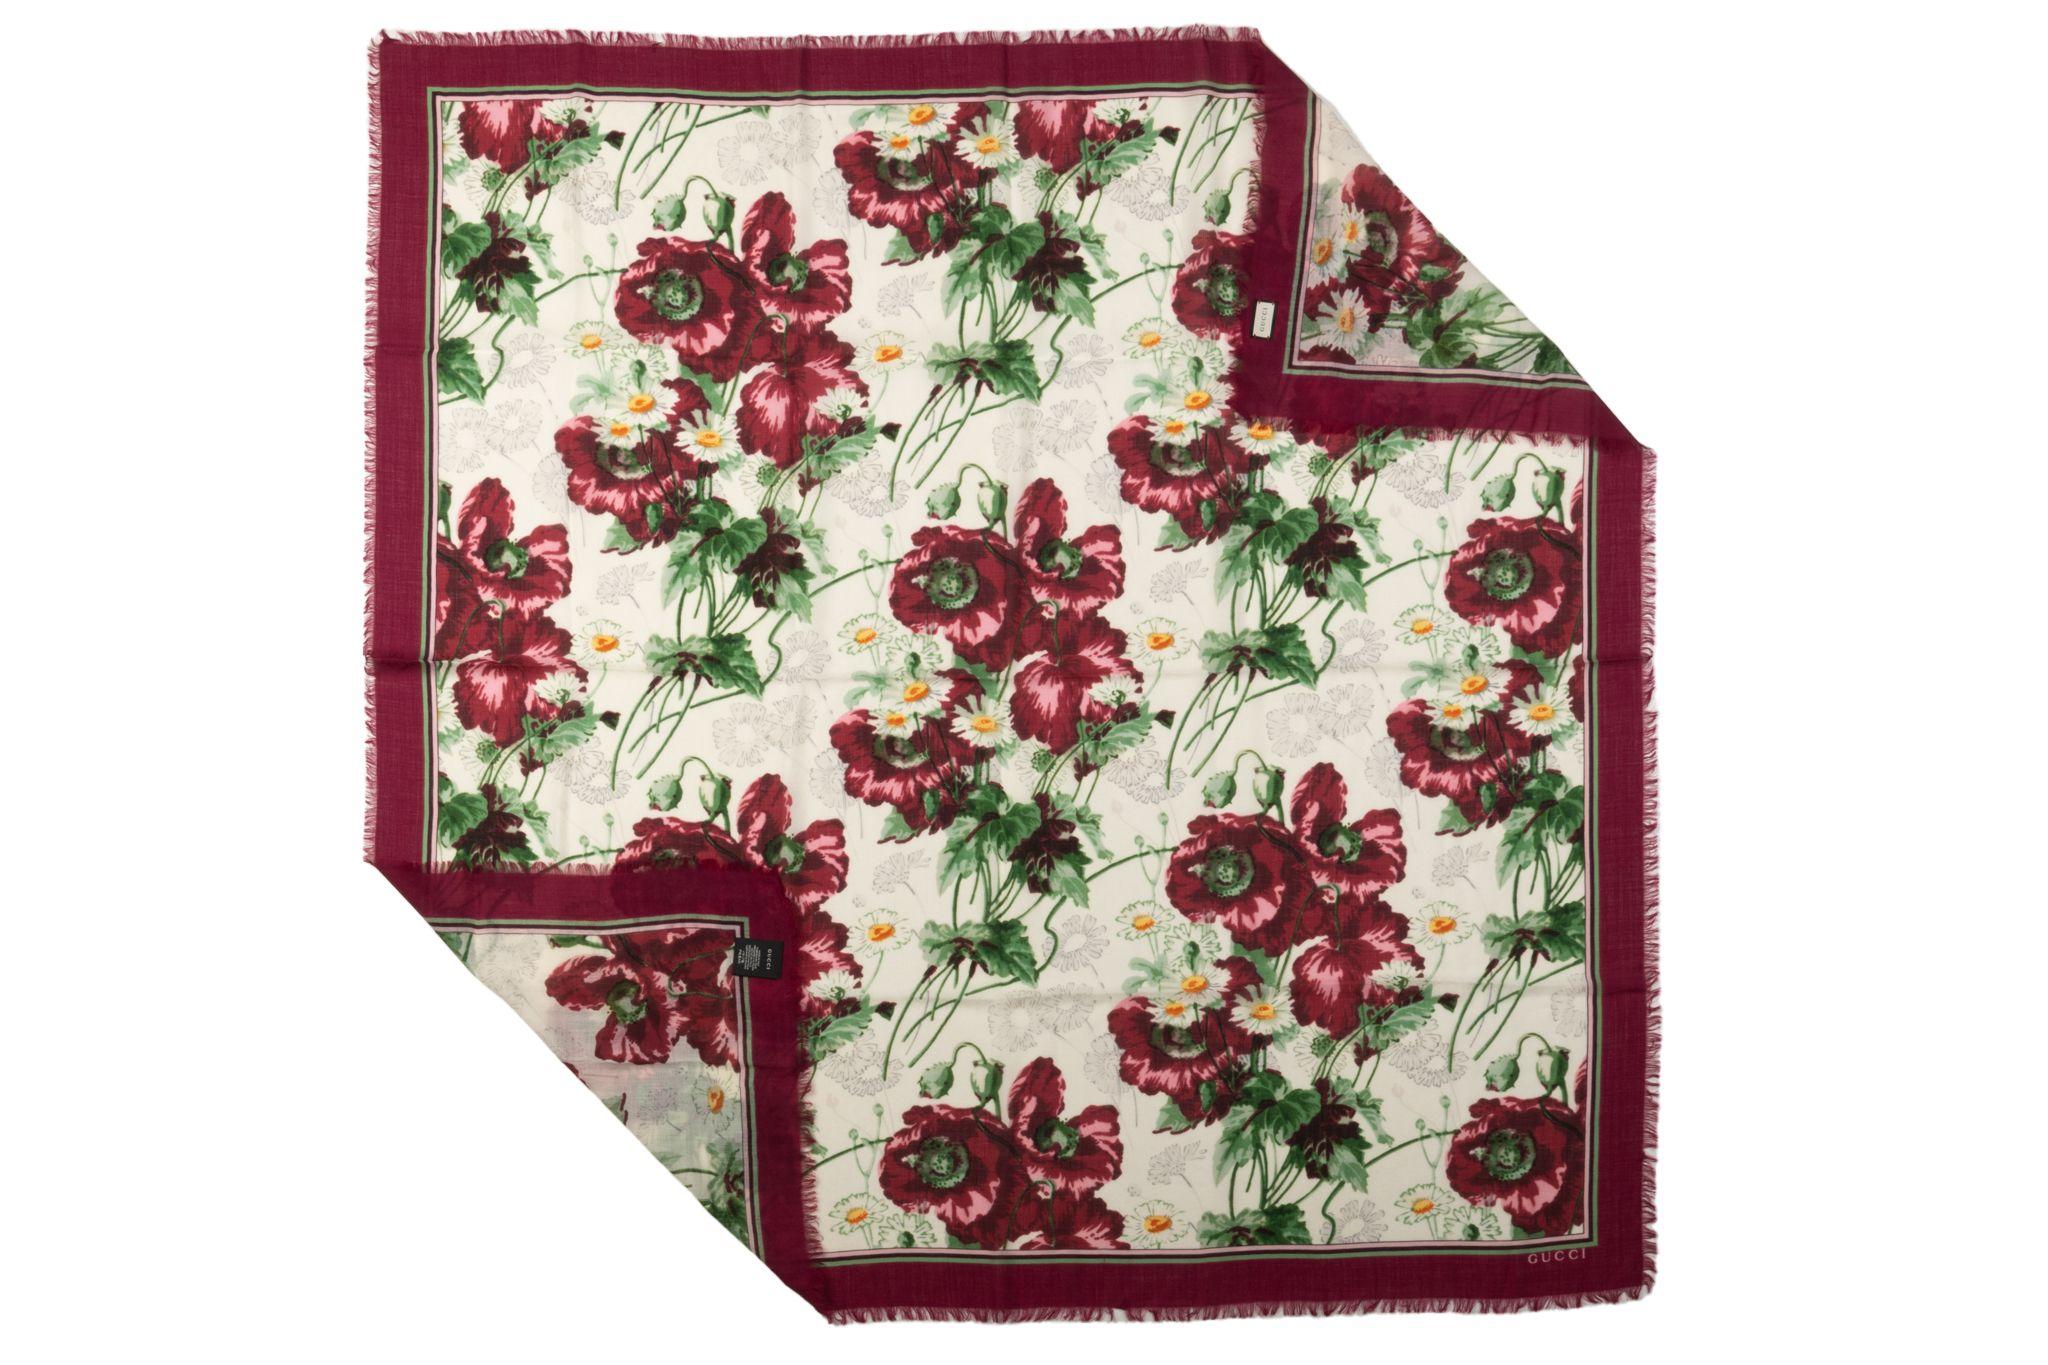 Gucci brand new wool shawl with flower design. Cream , green and burgundy combo. Fringe trim .
